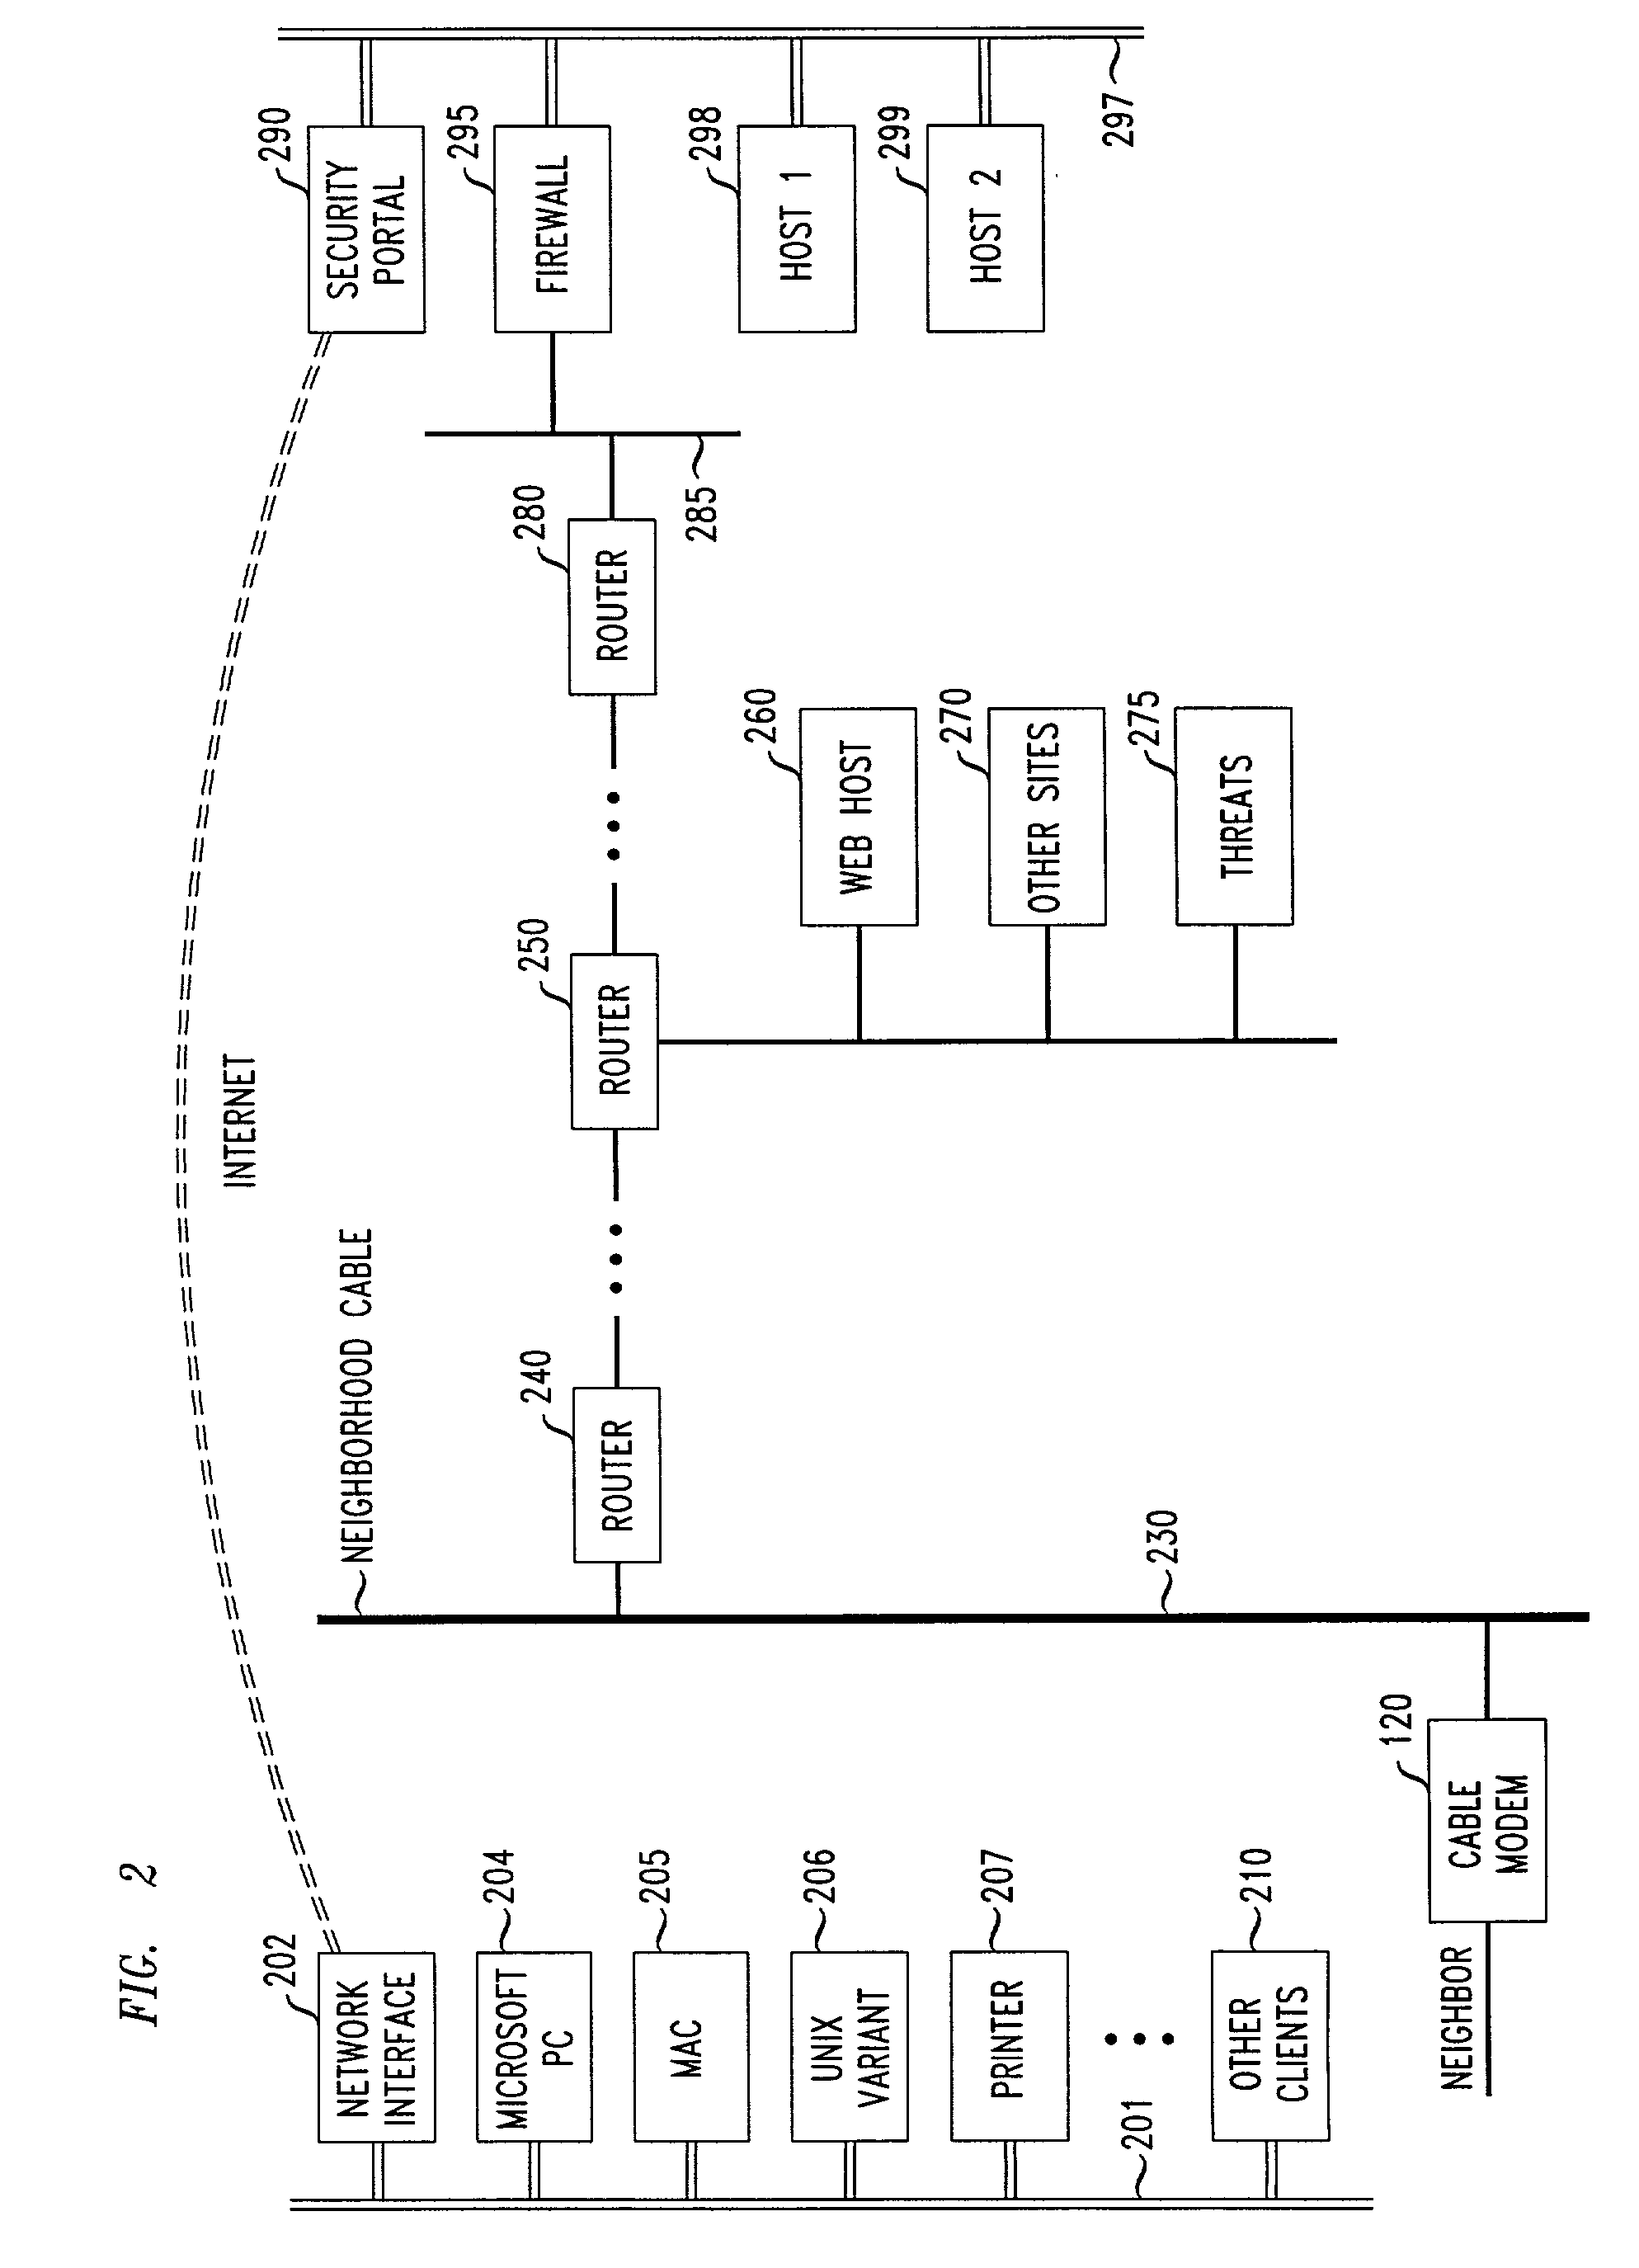 System for automated connection to virtual private networks related applications